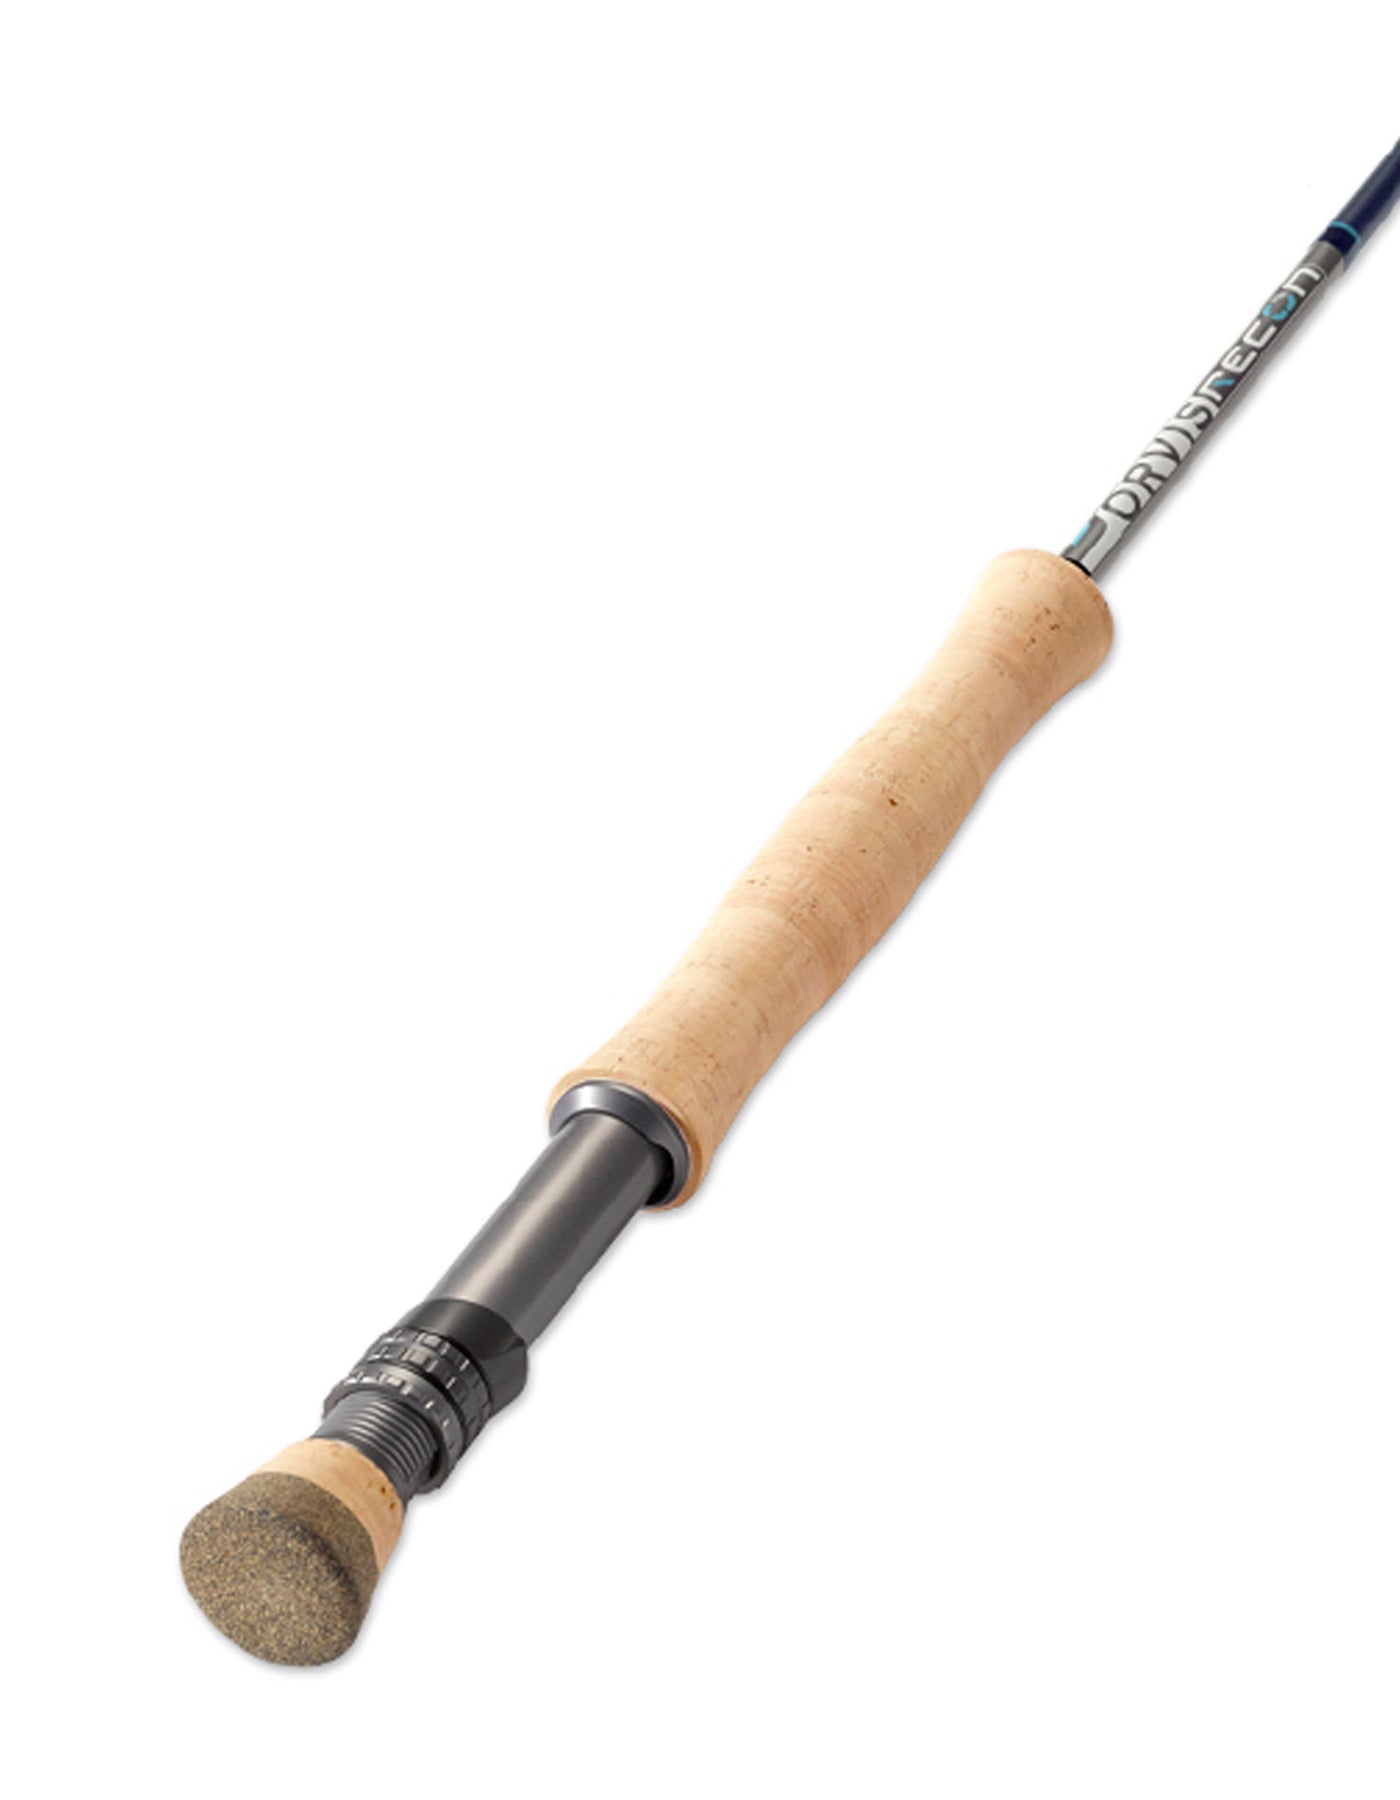 Orvis 150th Anniversary Special Limited Edition Fly Rod: In 2006 7'6 2p 2t  4 5/8 oz. for WF5 line, medium fast. …